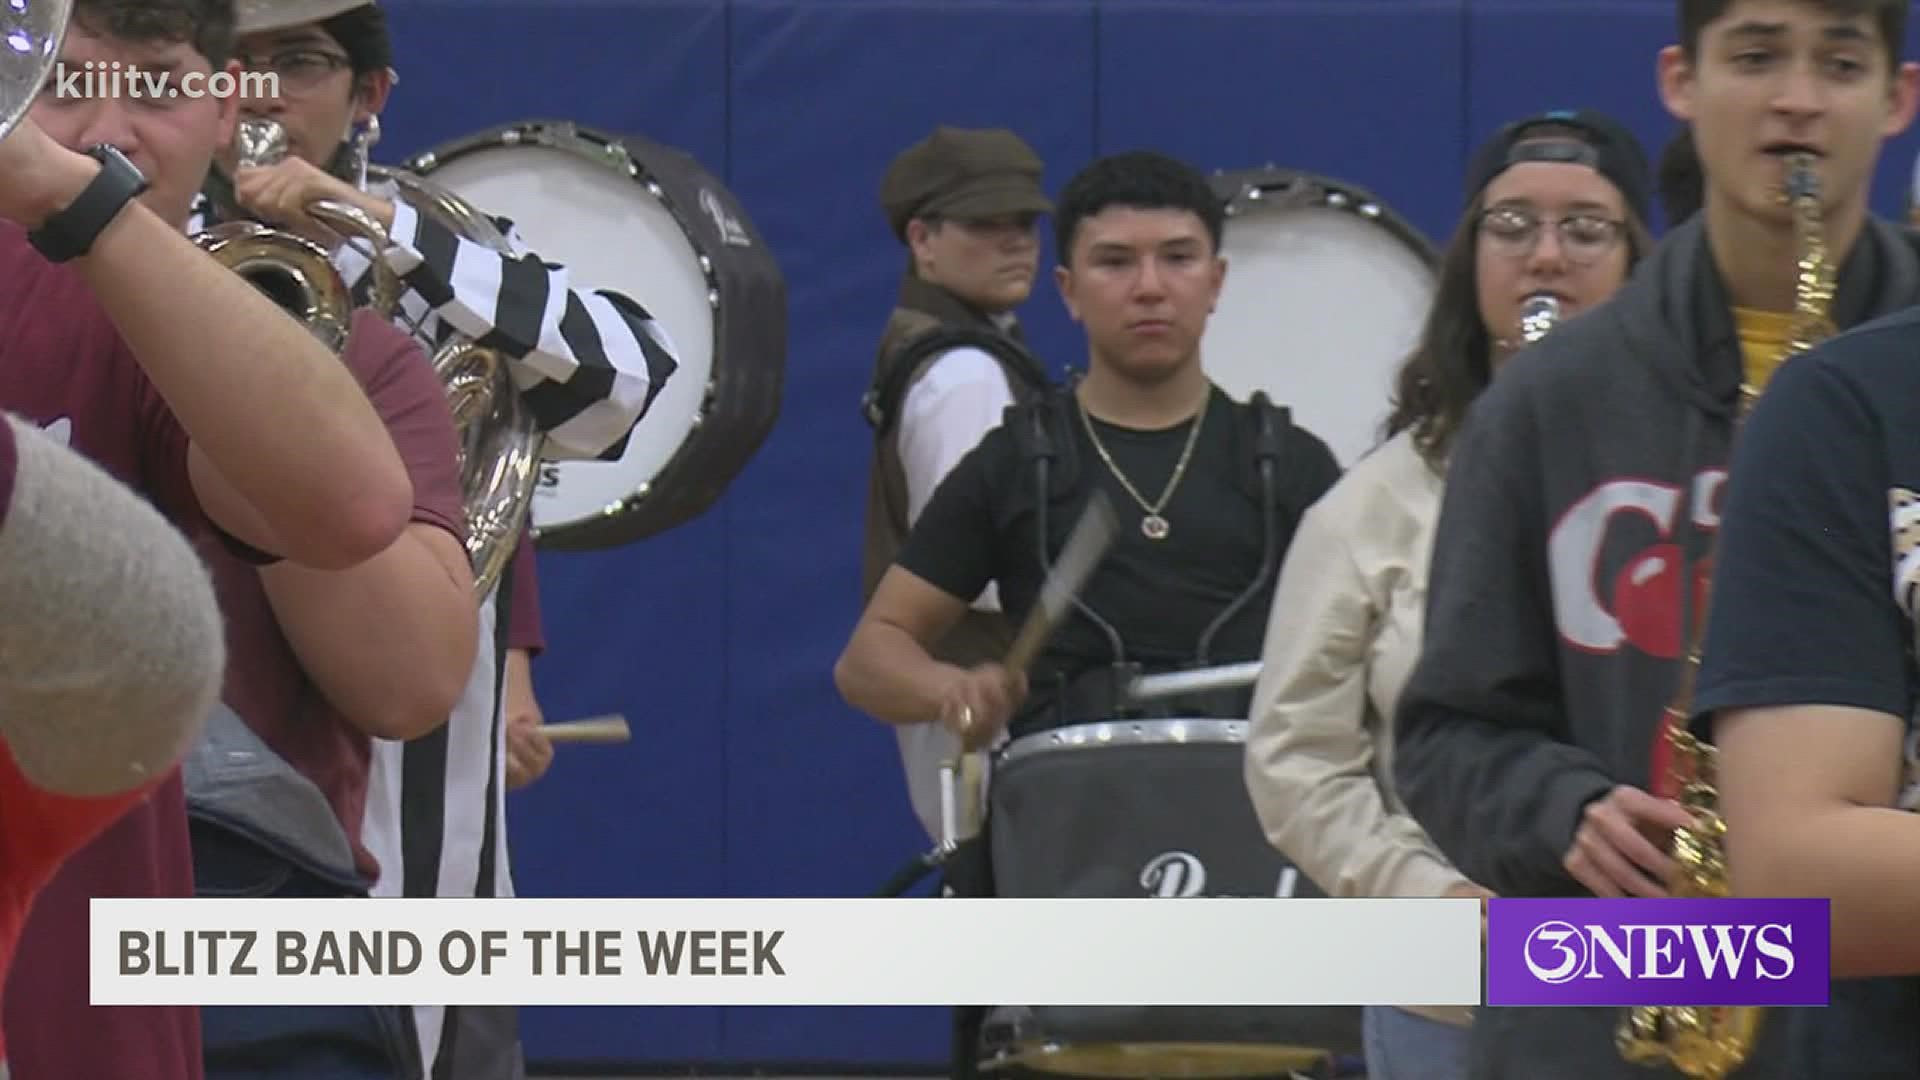 The Veterans Memorial Eagles beat out Flour Bluff in the online vote for the Blitz Band of the Week honor.